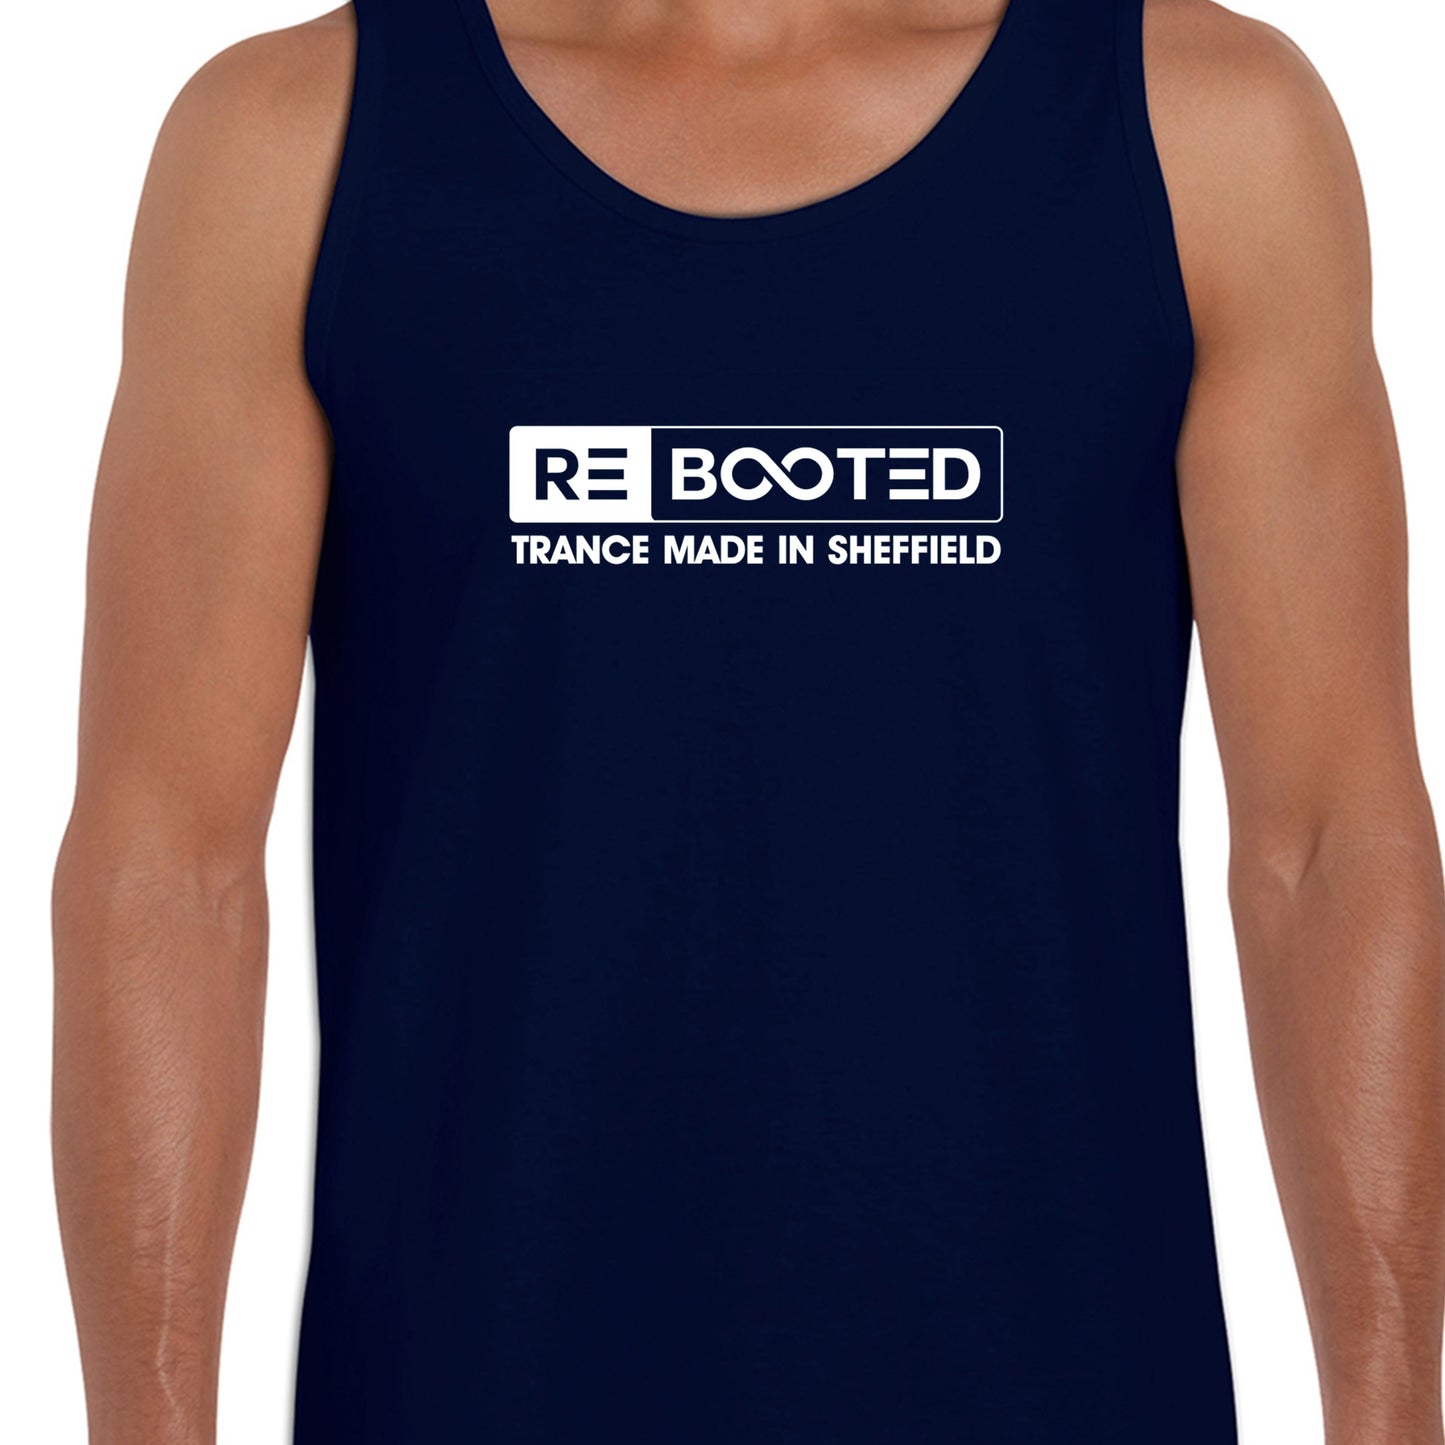 REBOOTED Trance Made In Sheffield - Mens Vest Navy Blue White Text